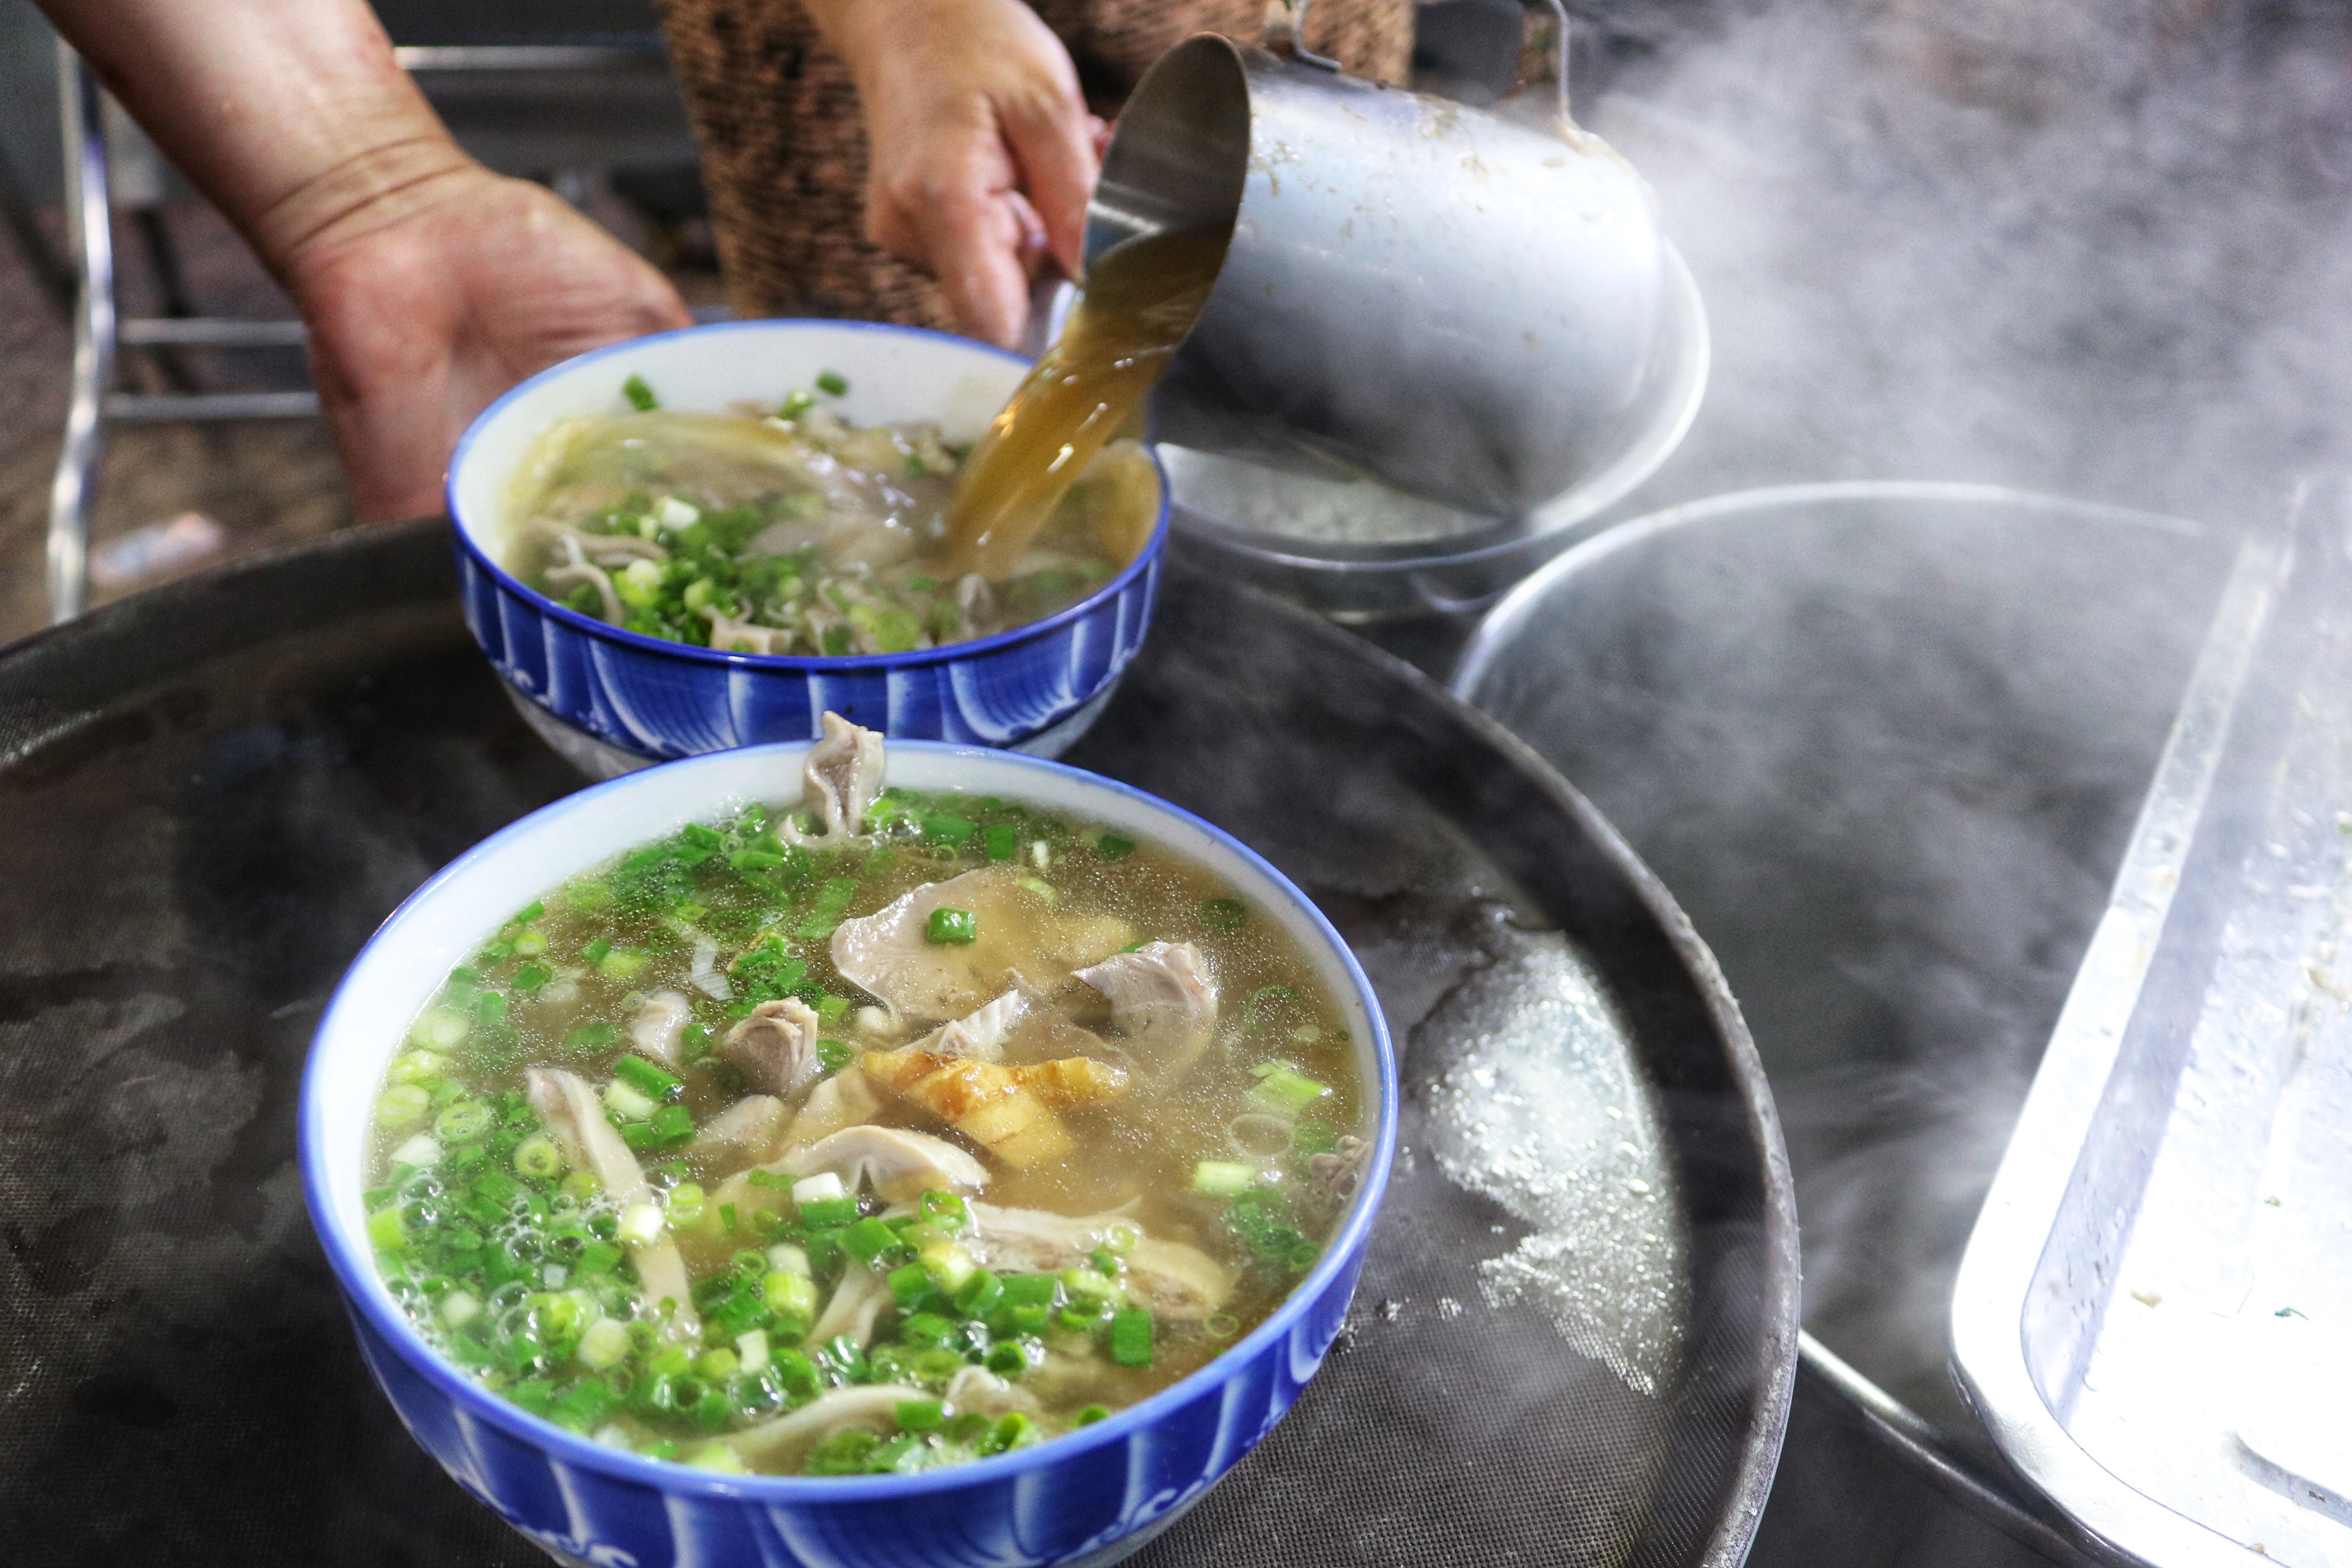 Hoa pours boiling hot broth into bowls of huyet chung at her stall on Pham Van Hai Street in Tan Binh District, Ho Chi Minh City. Photo: Hoang An / Tuoi Tre News